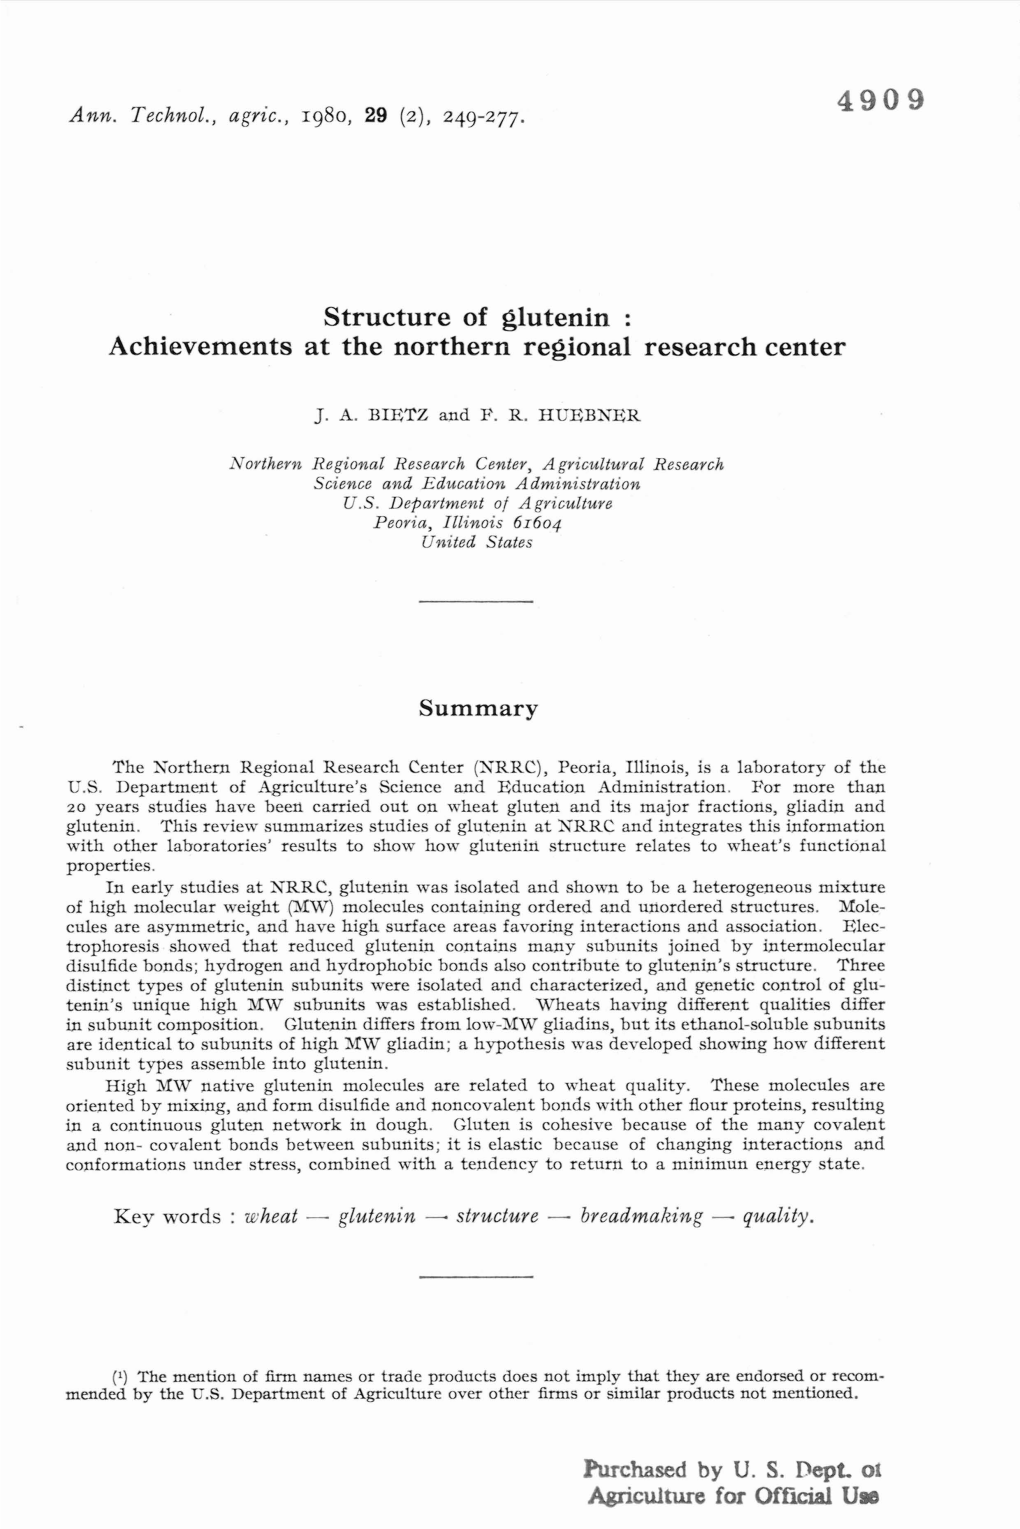 Structure of Glutenin : Achievements at the Northern Regional Research Center